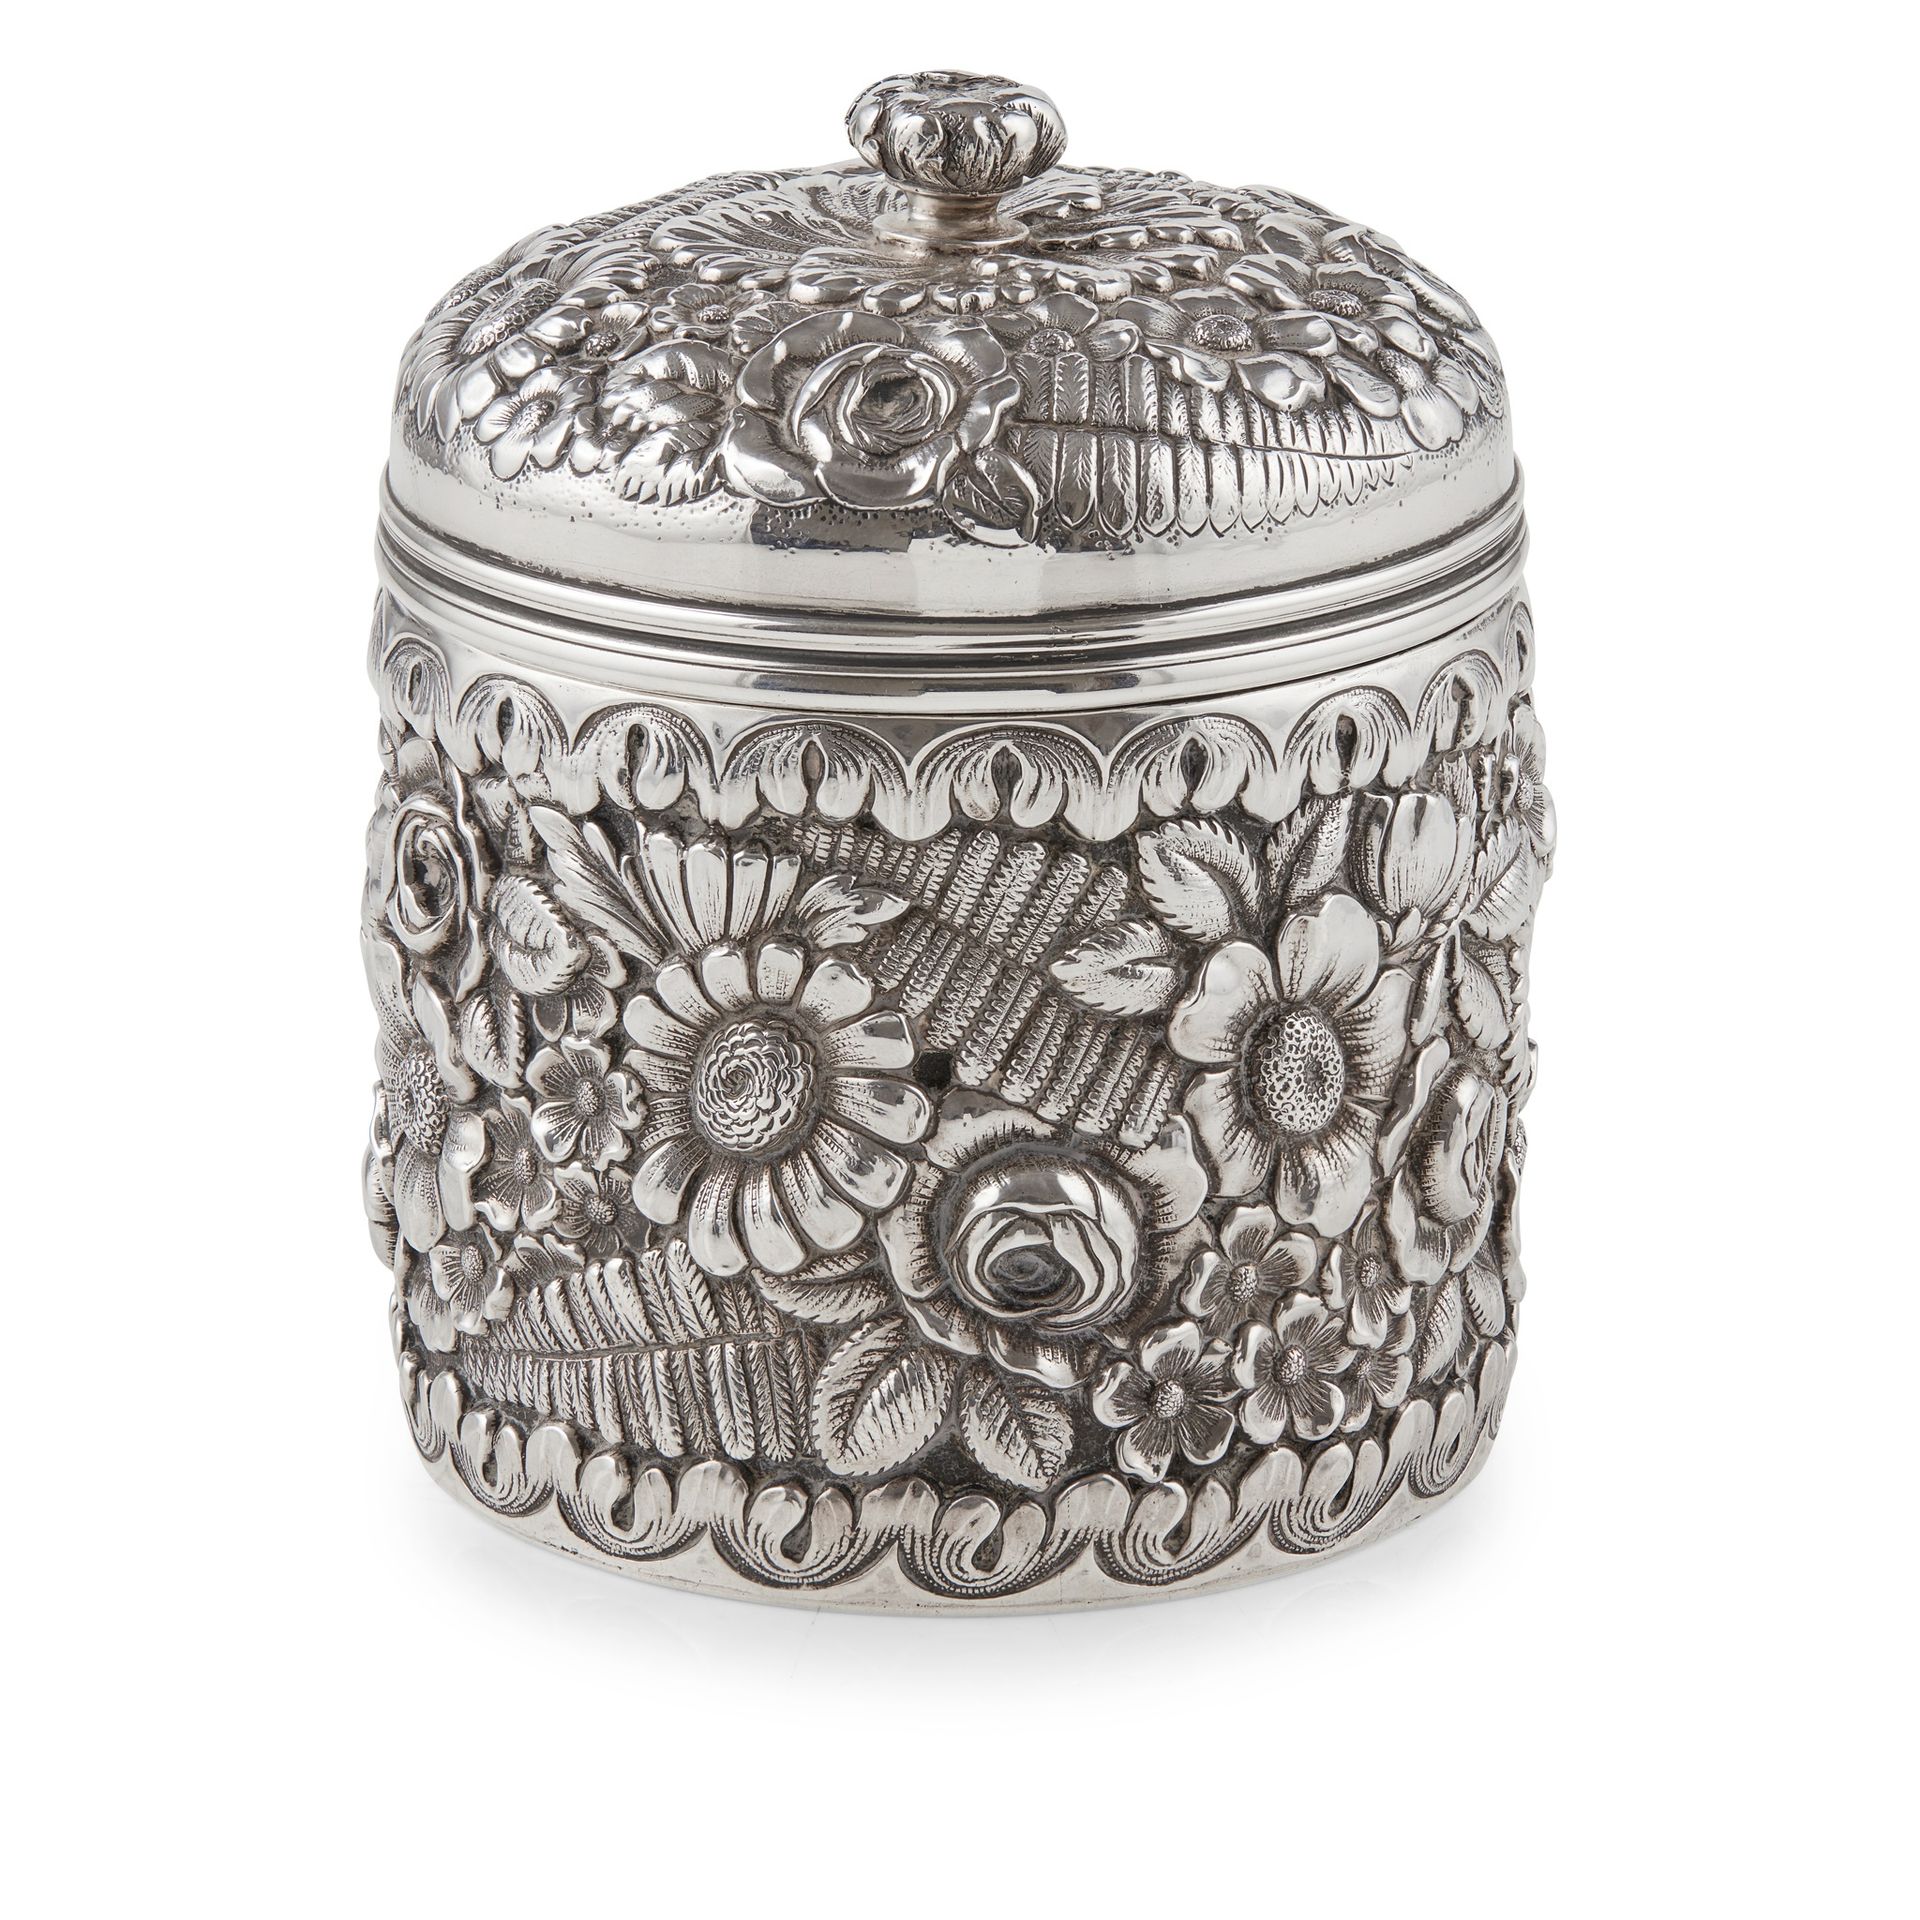 TIFFANY & CO., NEW YORK BOX & COVER, CIRCA 1906 argent sterling, avec intérieur &hellip;